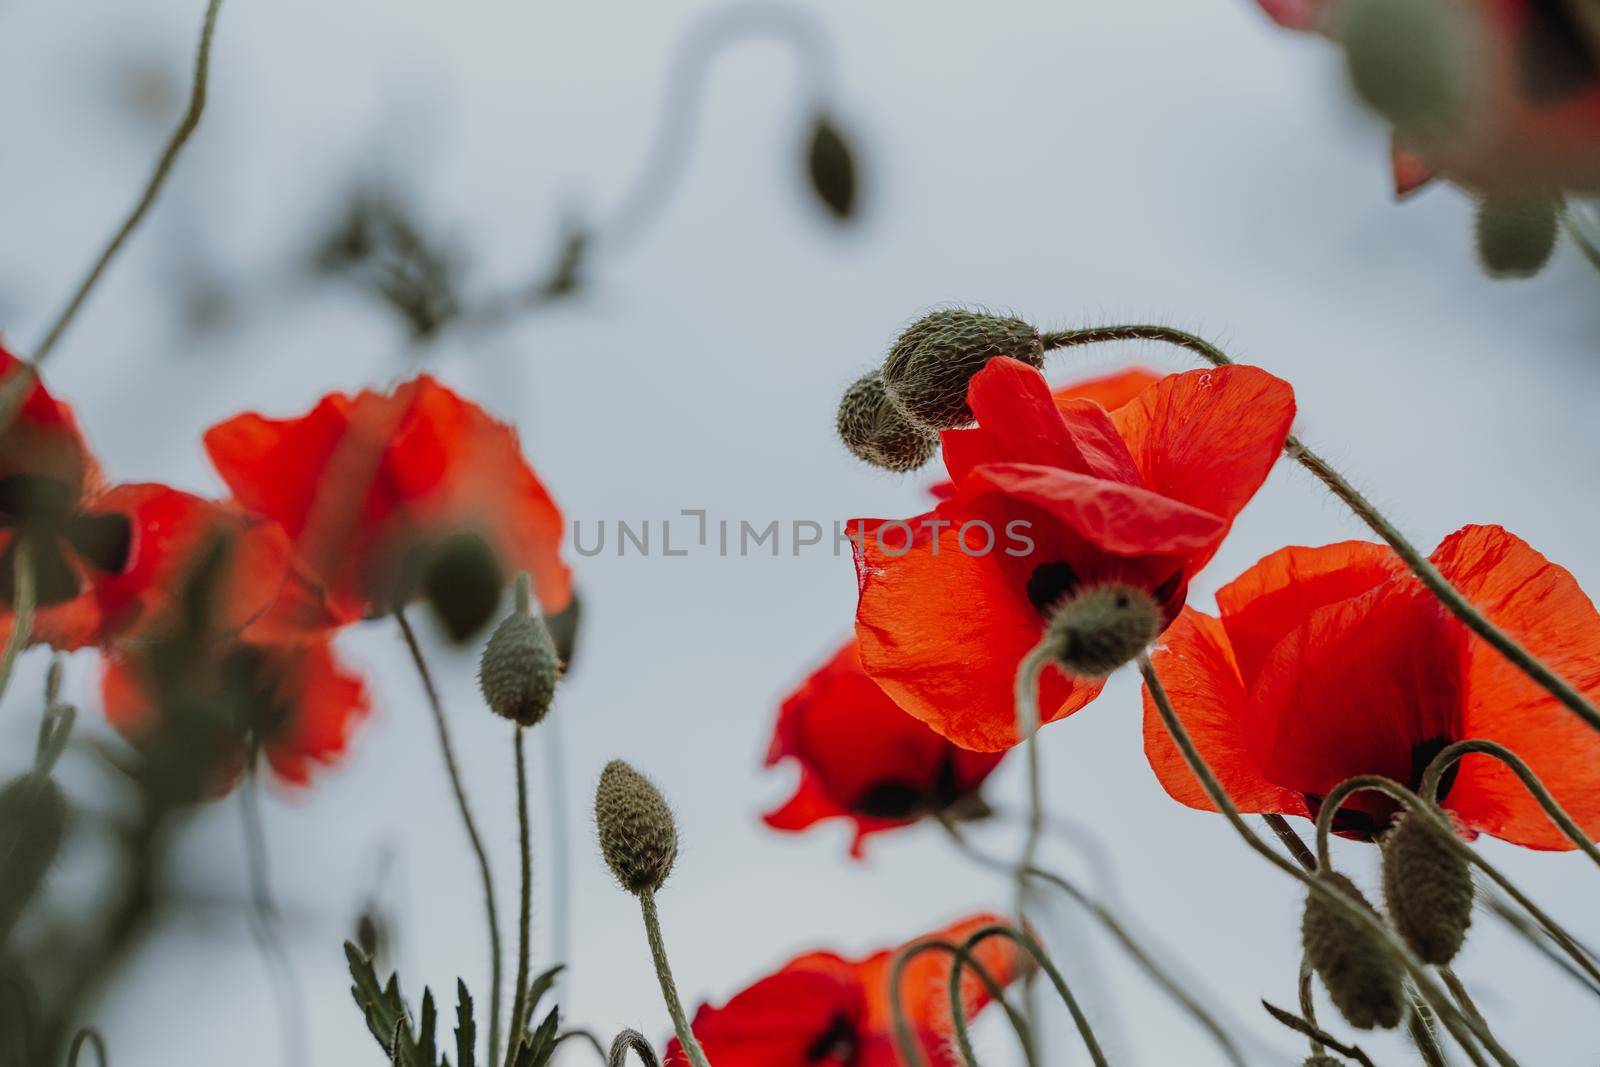 Abstract background with poppies in the field.